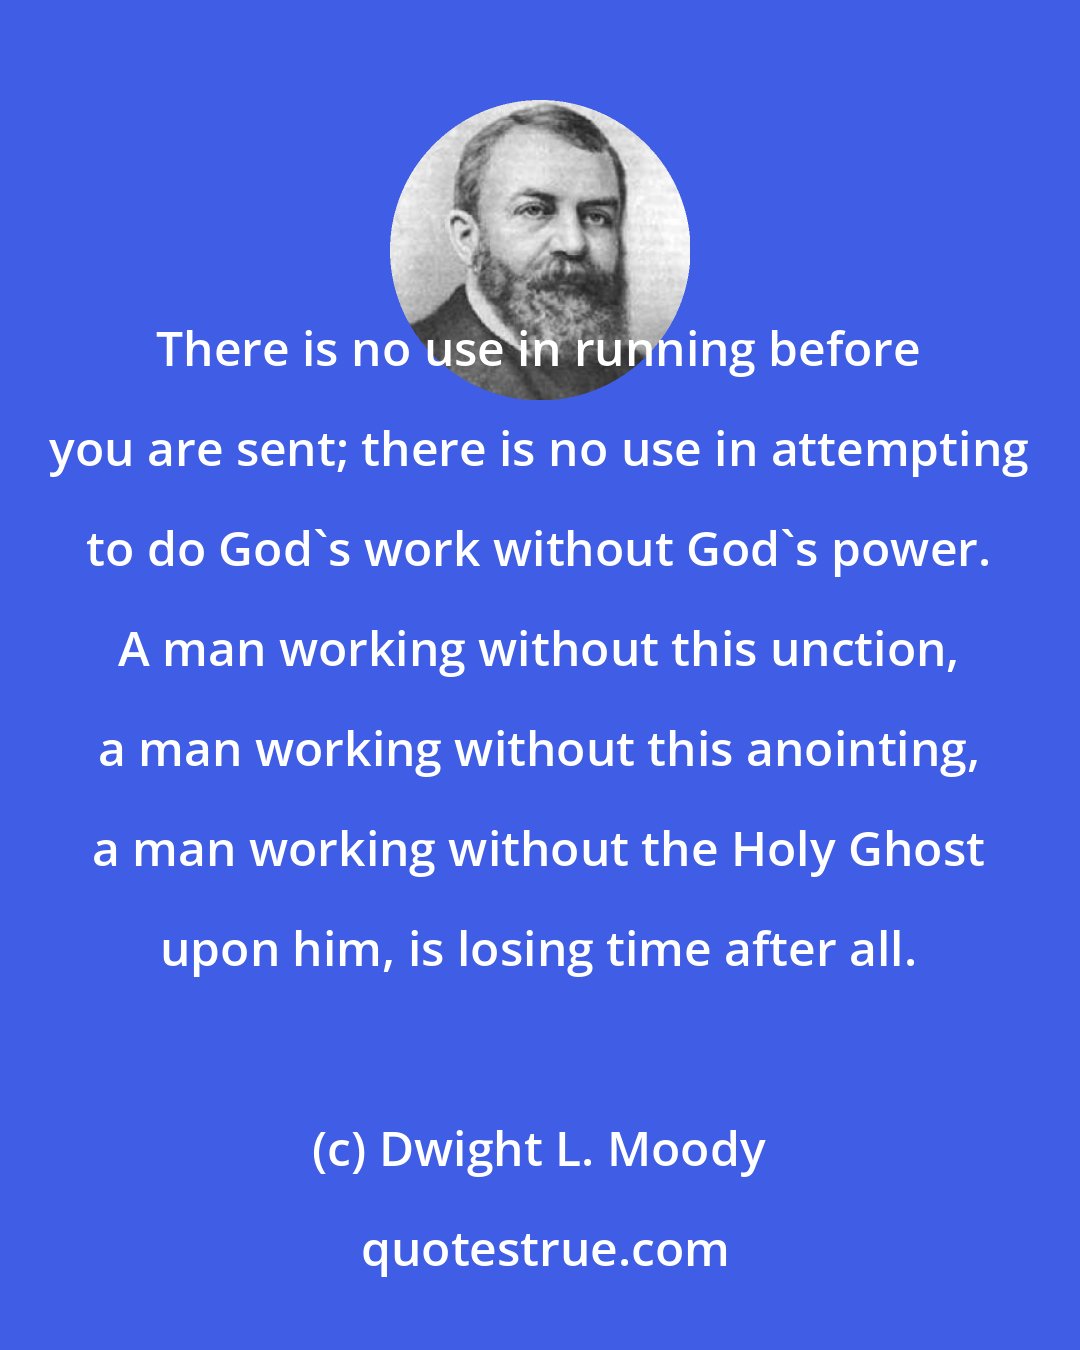 Dwight L. Moody: There is no use in running before you are sent; there is no use in attempting to do God's work without God's power. A man working without this unction, a man working without this anointing, a man working without the Holy Ghost upon him, is losing time after all.